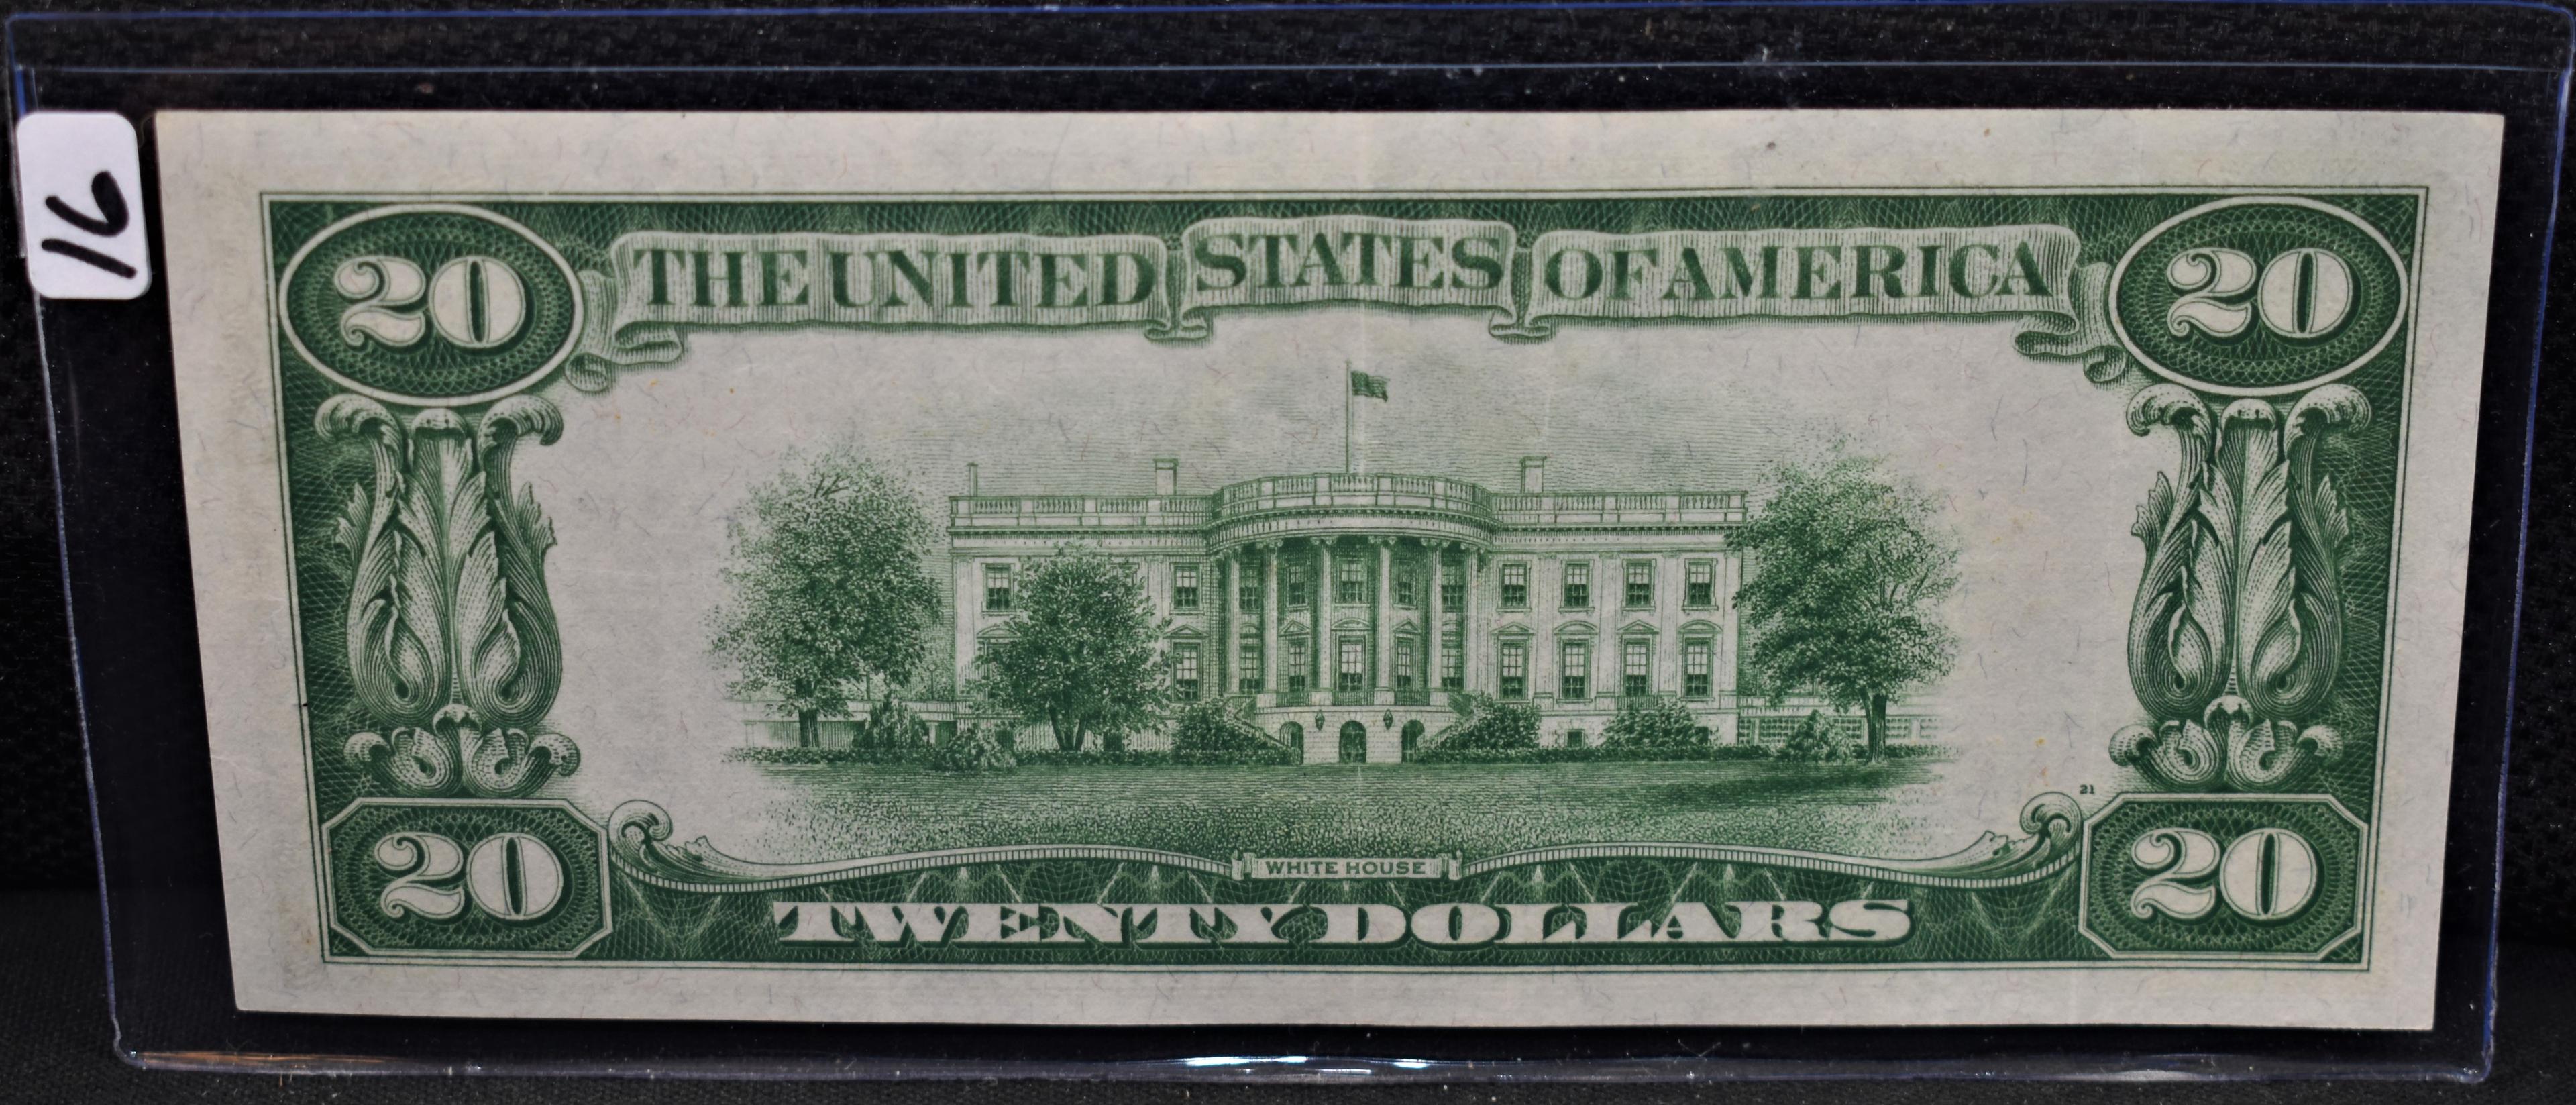 $20 CHOICE 63 GOLD CERTIFICATE SERIES 1928